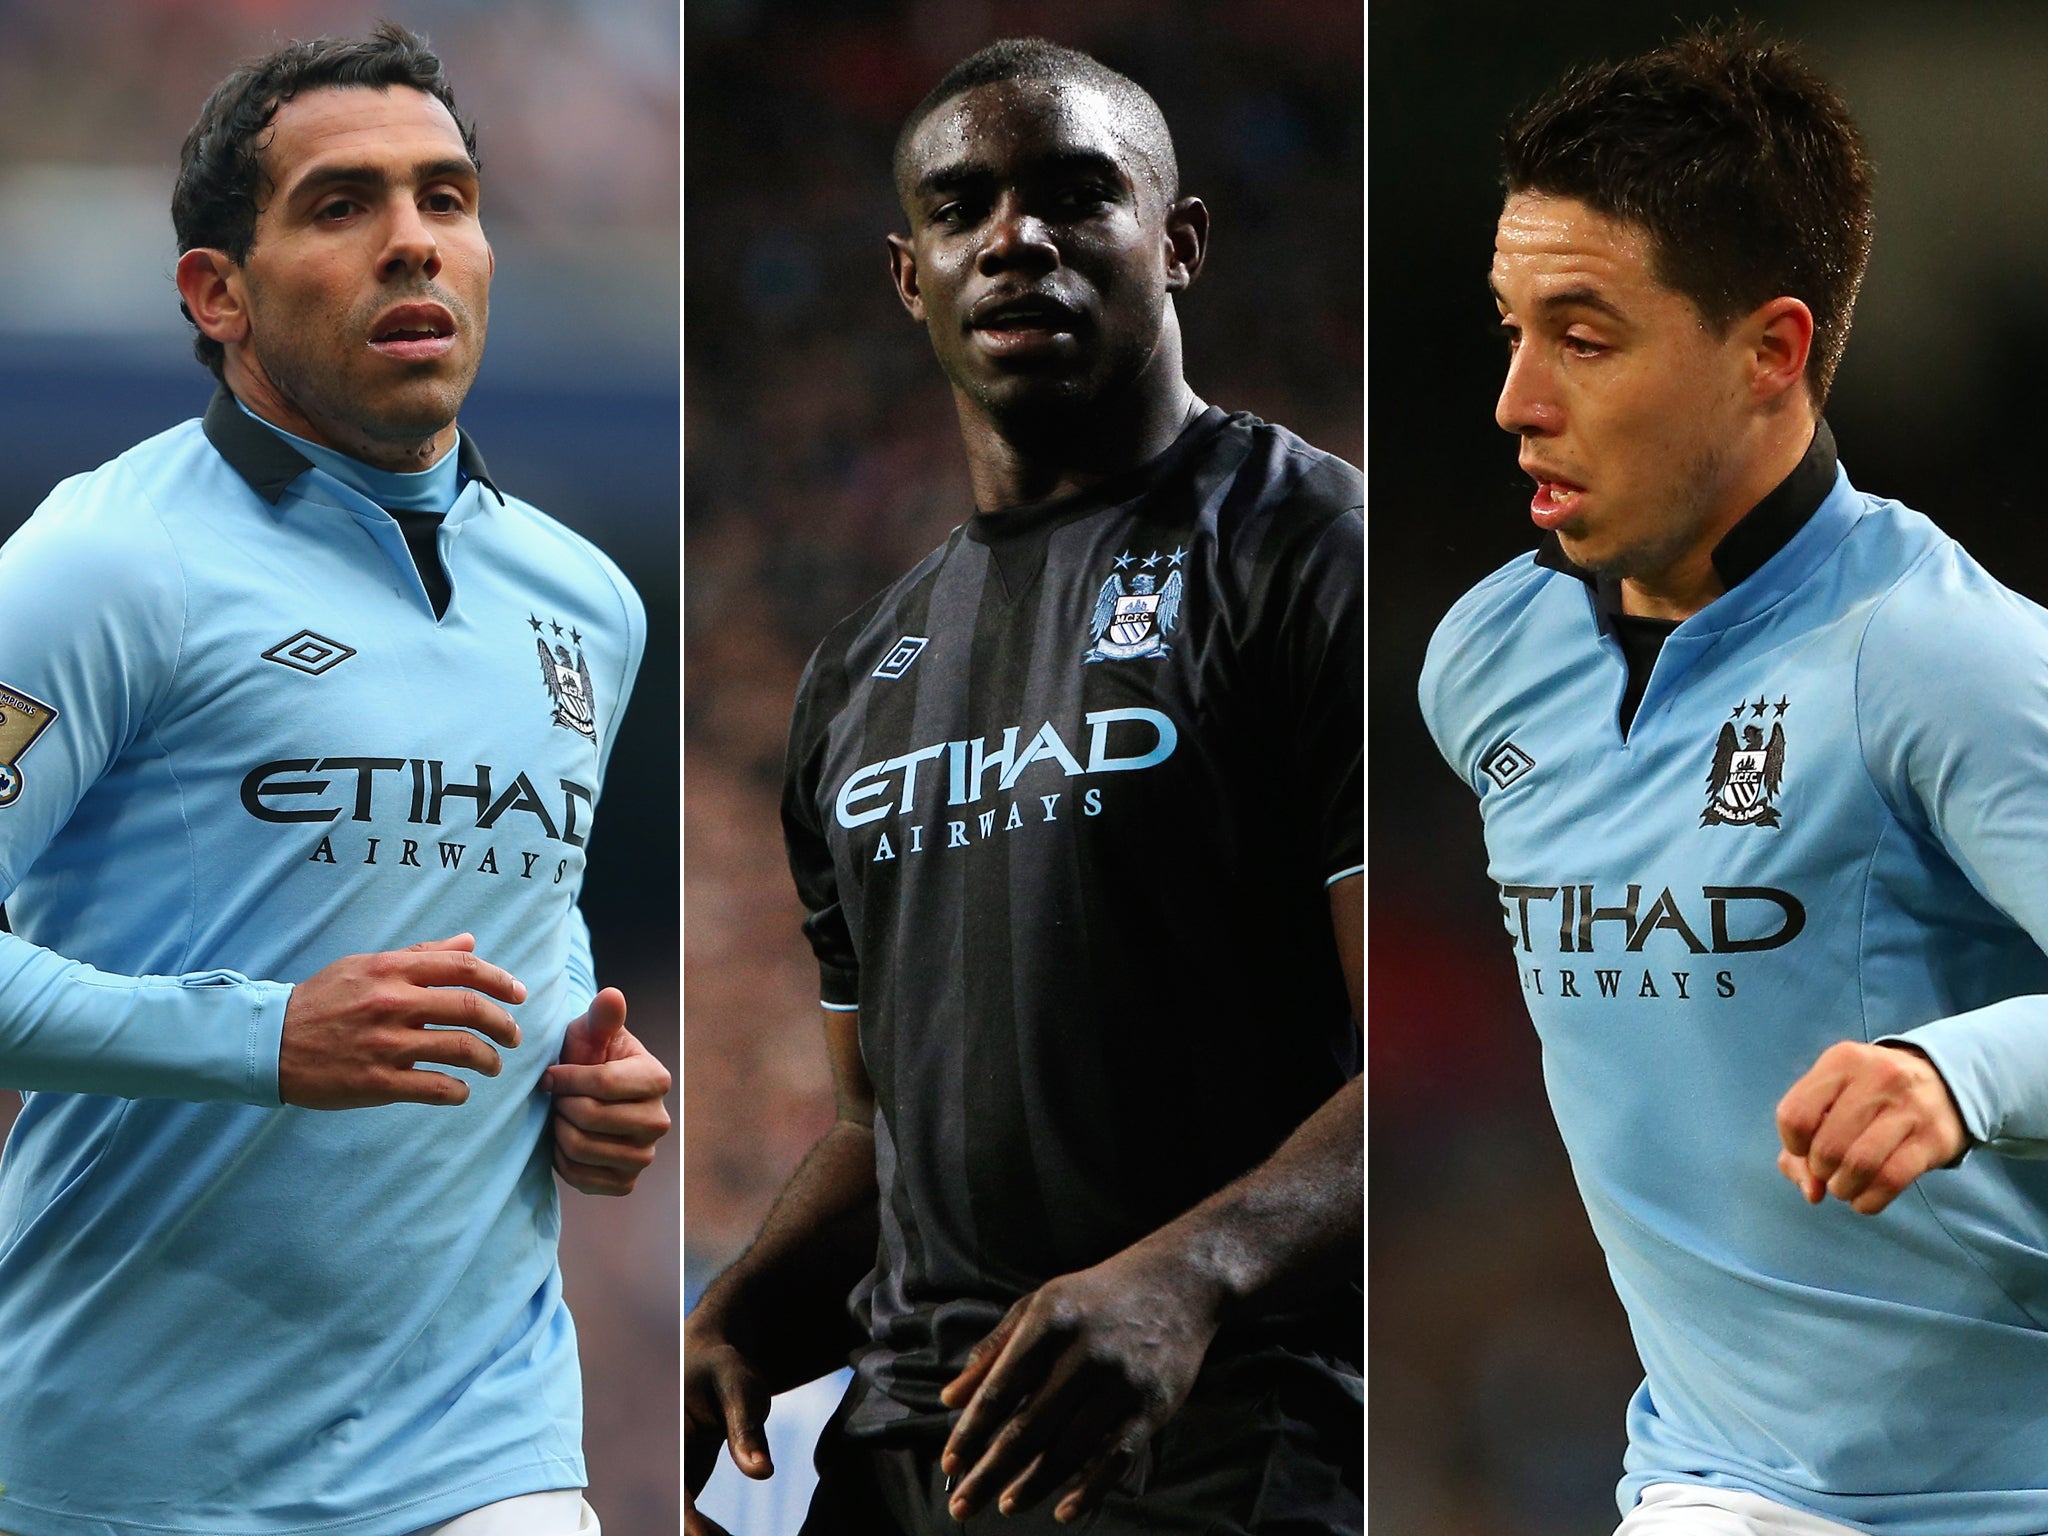 Banned from driving: Manchester City's Micah Richards (centre) joined Carlos Tevez (left) and Samir Nasri on the club's list of footballers banned from driving this month